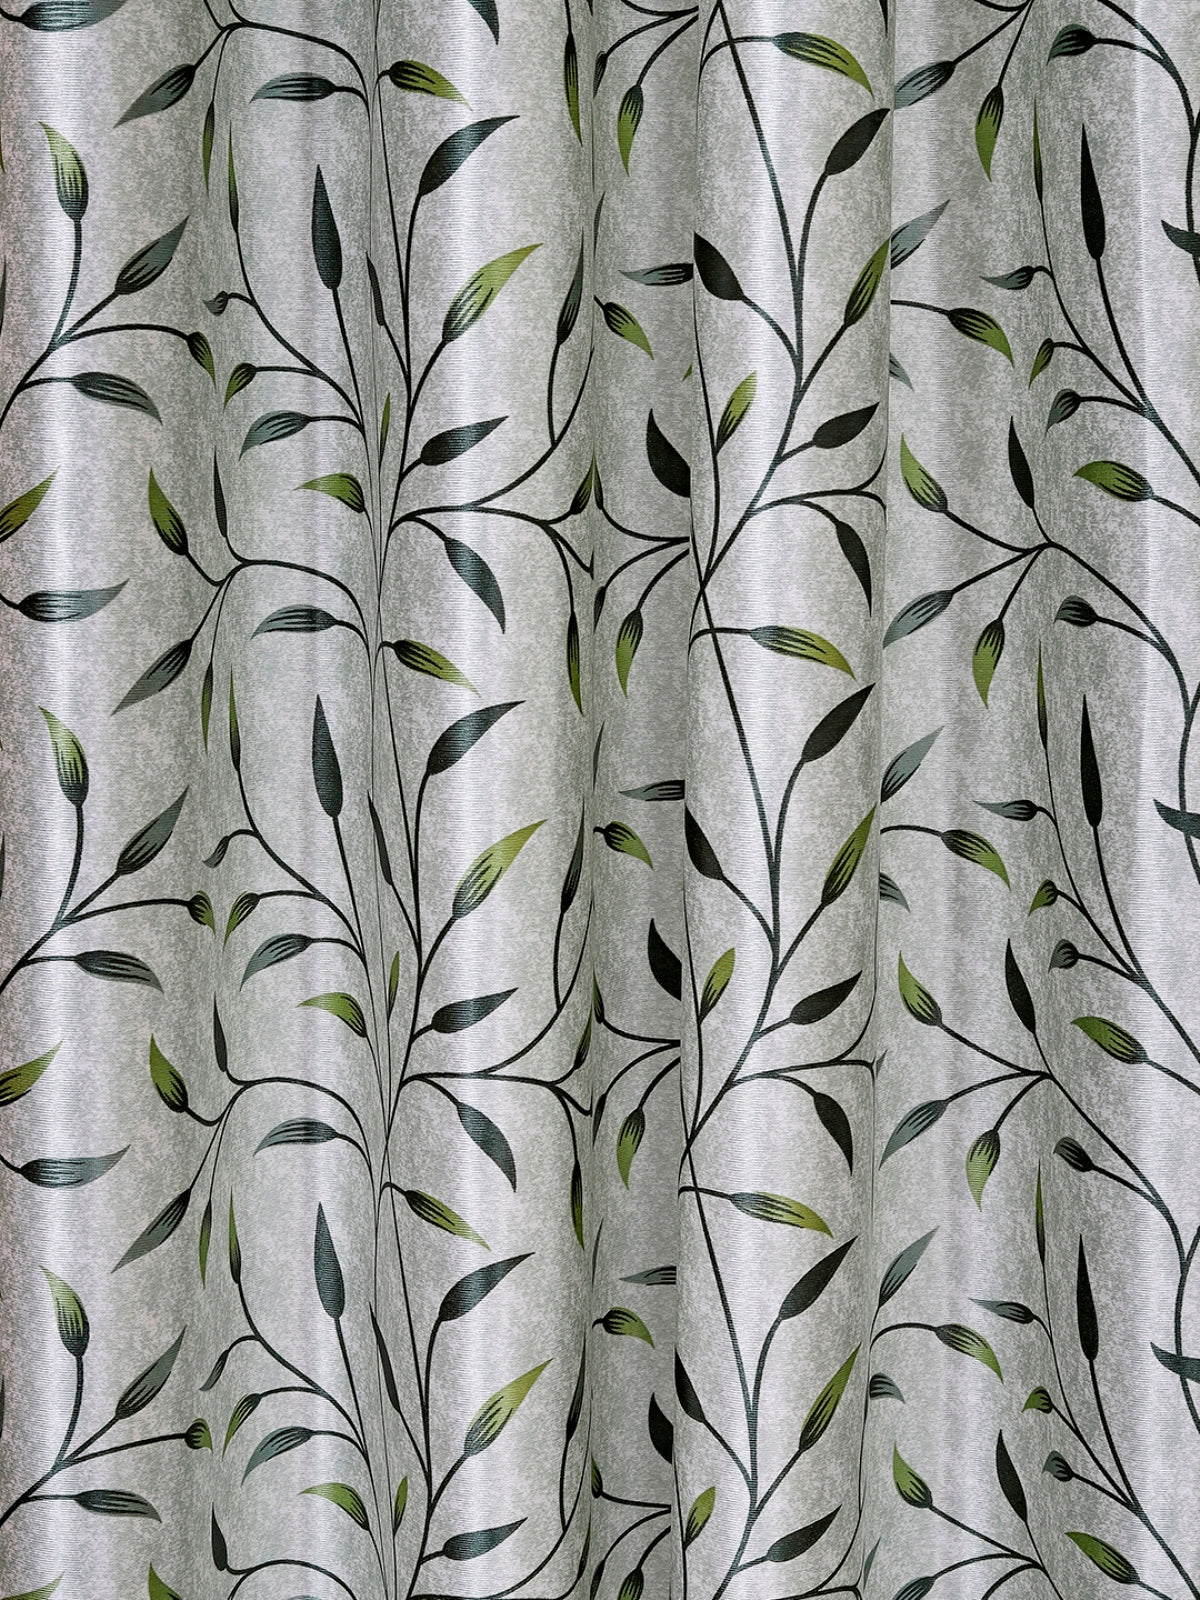 Romee Green Leafy Patterned Set of 2 Door Curtains